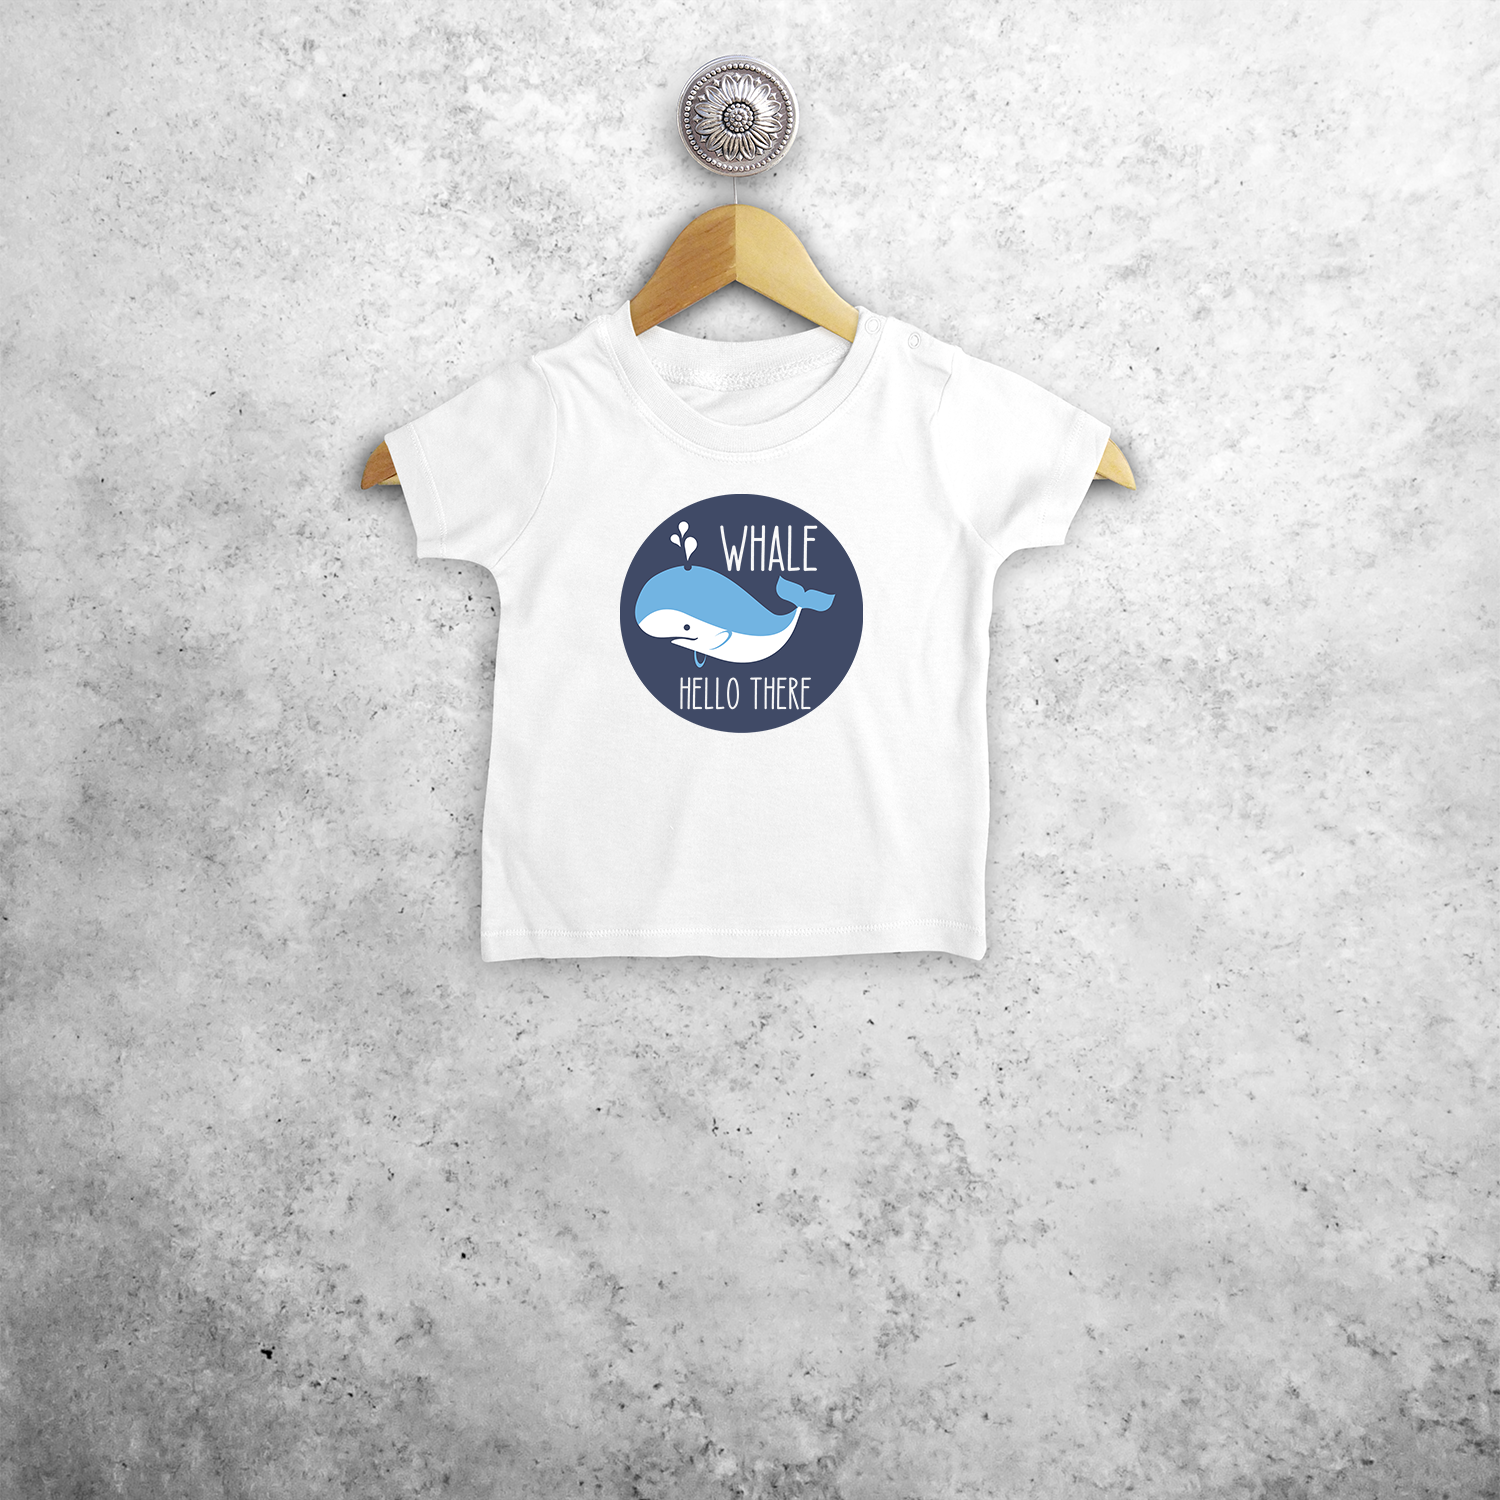 'Whale hello there' baby shortsleeve shirt